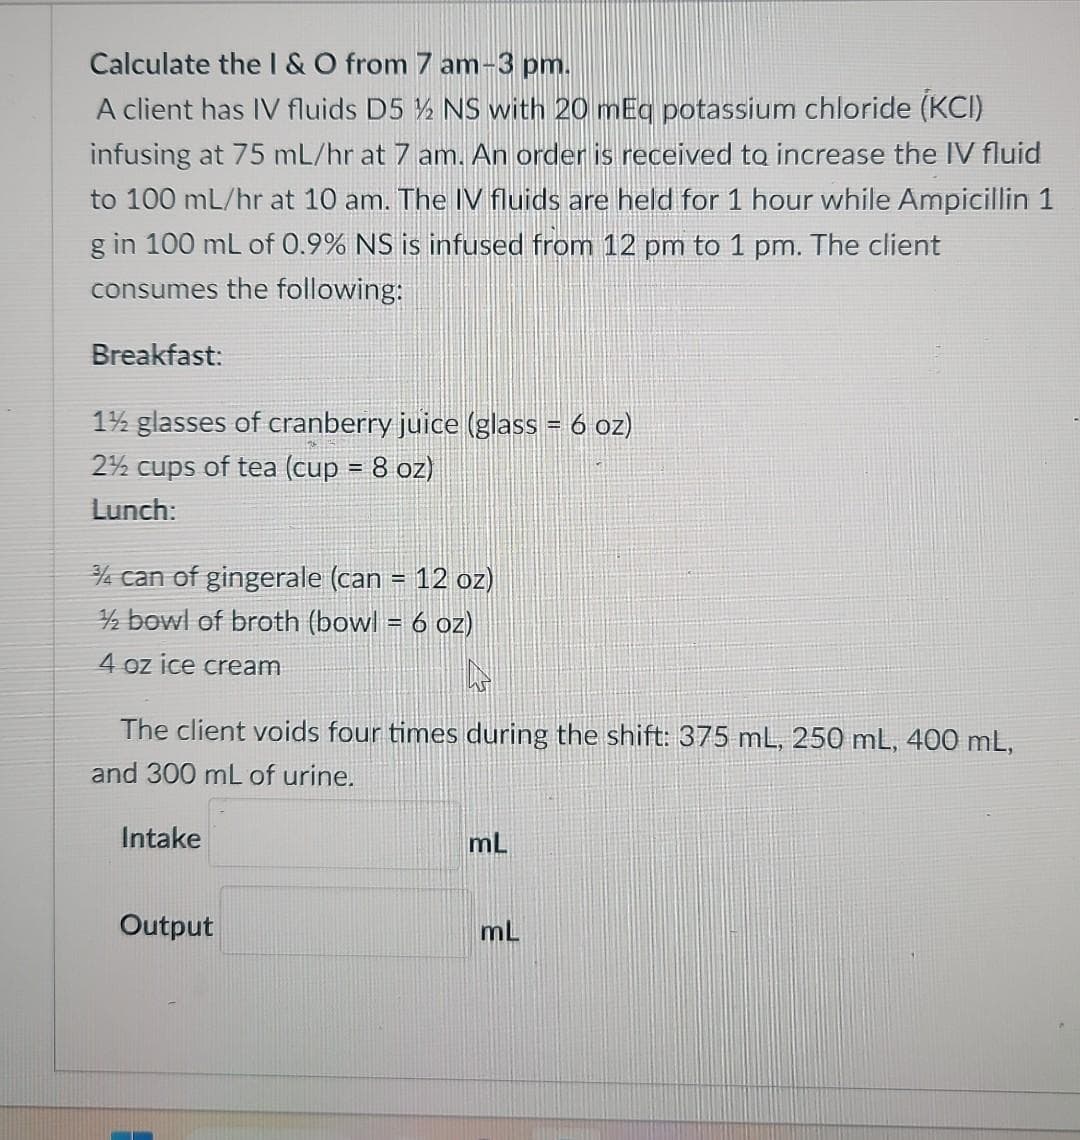 Calculate the I & O from 7 am-3 pm.
A client has IV fluids D5 ½ NS with 20 mEq potassium chloride (KCI)
infusing at 75 mL/hr at 7 am. An order is received to increase the IV fluid
to 100 mL/hr at 10 am. The IV fluids are held for 1 hour while Ampicillin 1
g in 100 mL of 0.9% NS is infused from 12 pm to 1 pm. The client
consumes the following:
Breakfast:
1½ glasses of cranberry juice (glass = 6 oz)
2½ cups of tea (cup = 8 oz)
Lunch:
3/4 can of gingerale (can = 12 oz)
2 bowl of broth (bowl = 6 oz)
4 oz ice cream
The client voids four times during the shift: 375 mL, 250 mL, 400 mL,
and 300 mL of urine.
Intake
Output
mL
mL